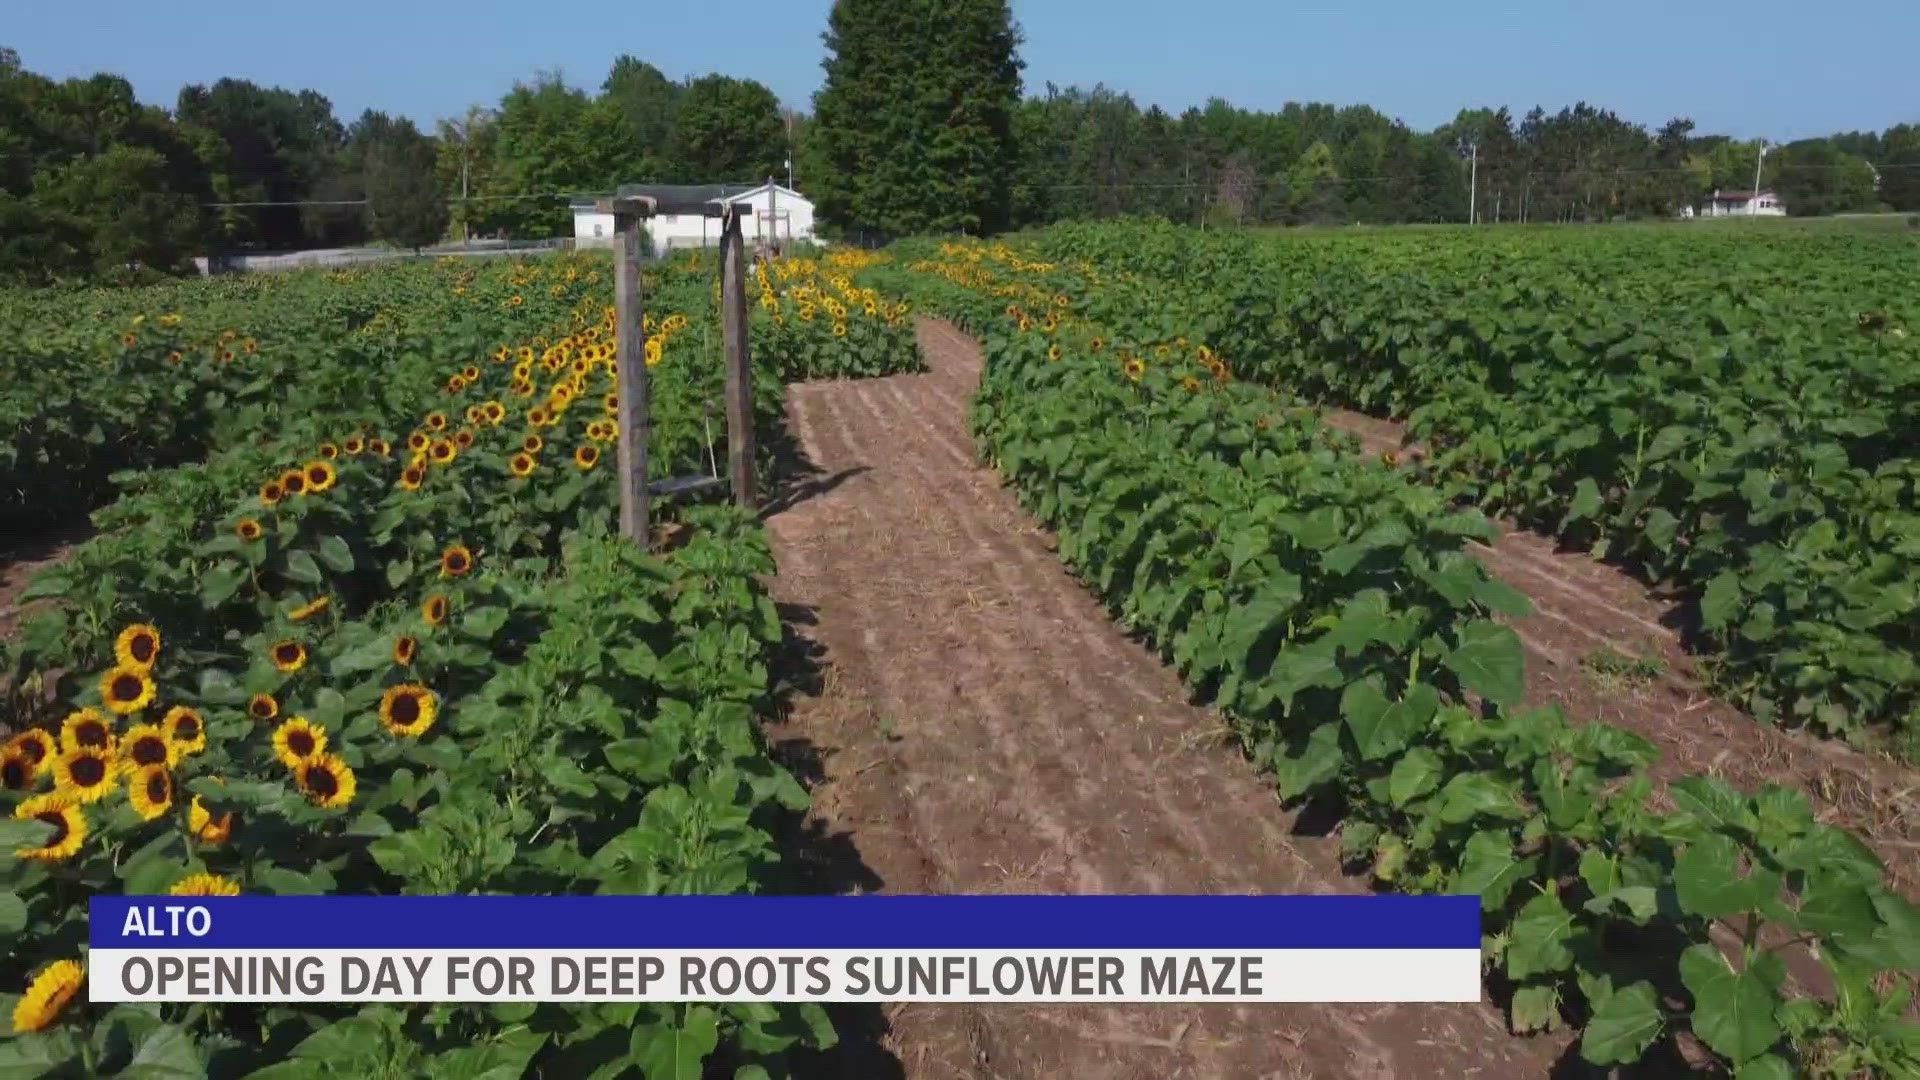 The maze features three and a half acres of 15 different varieties of sunflowers.